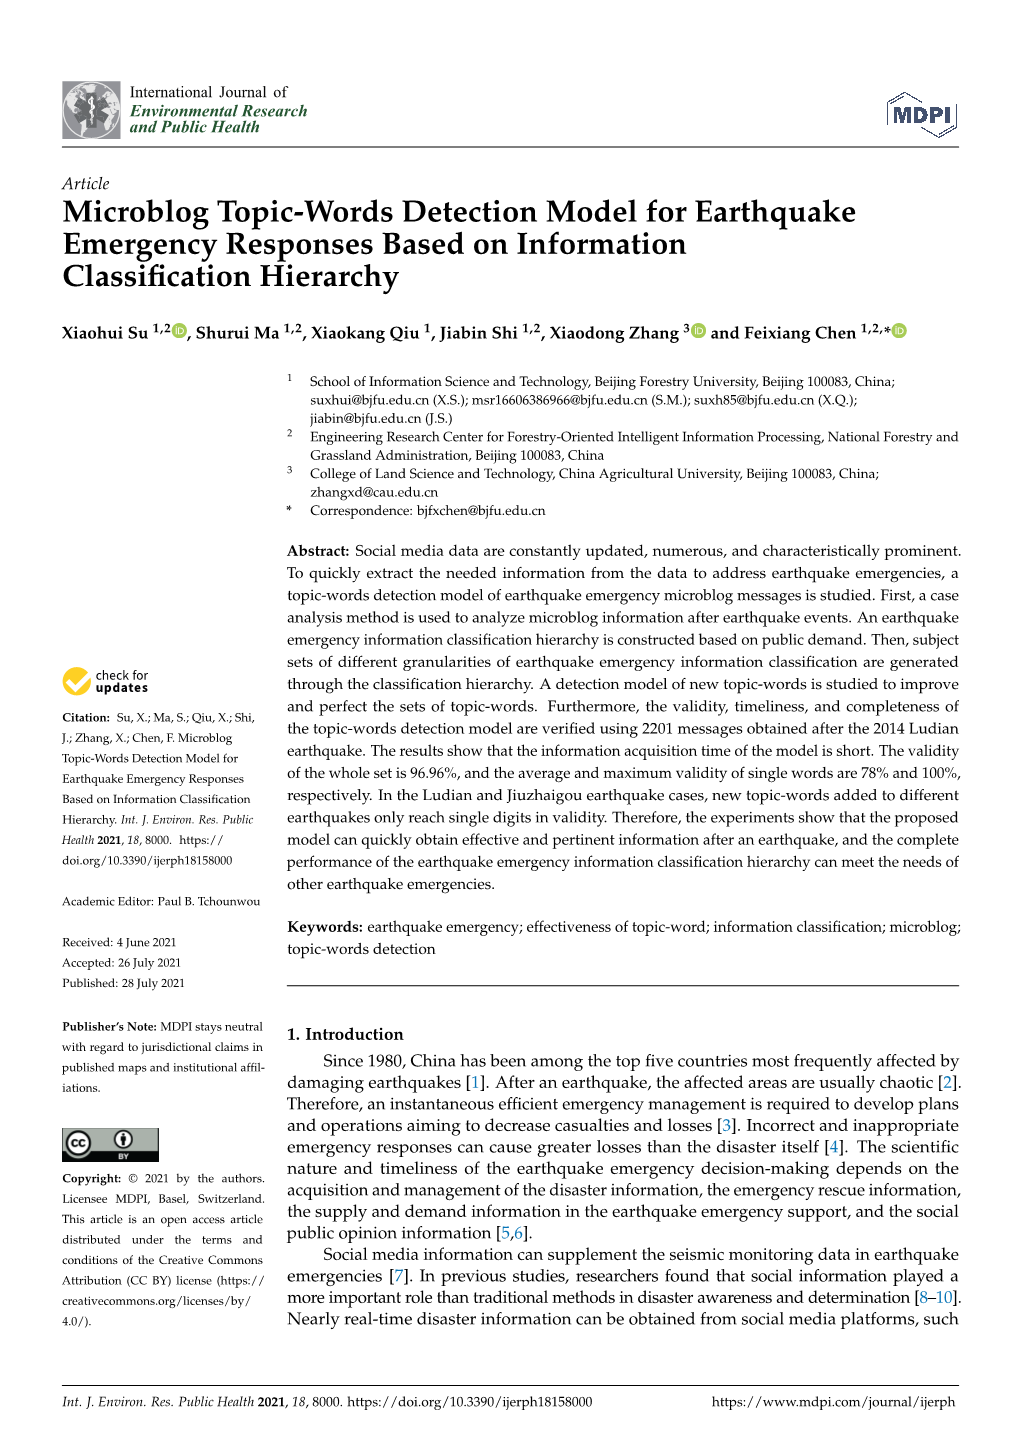 Microblog Topic-Words Detection Model for Earthquake Emergency Responses Based on Information Classiﬁcation Hierarchy